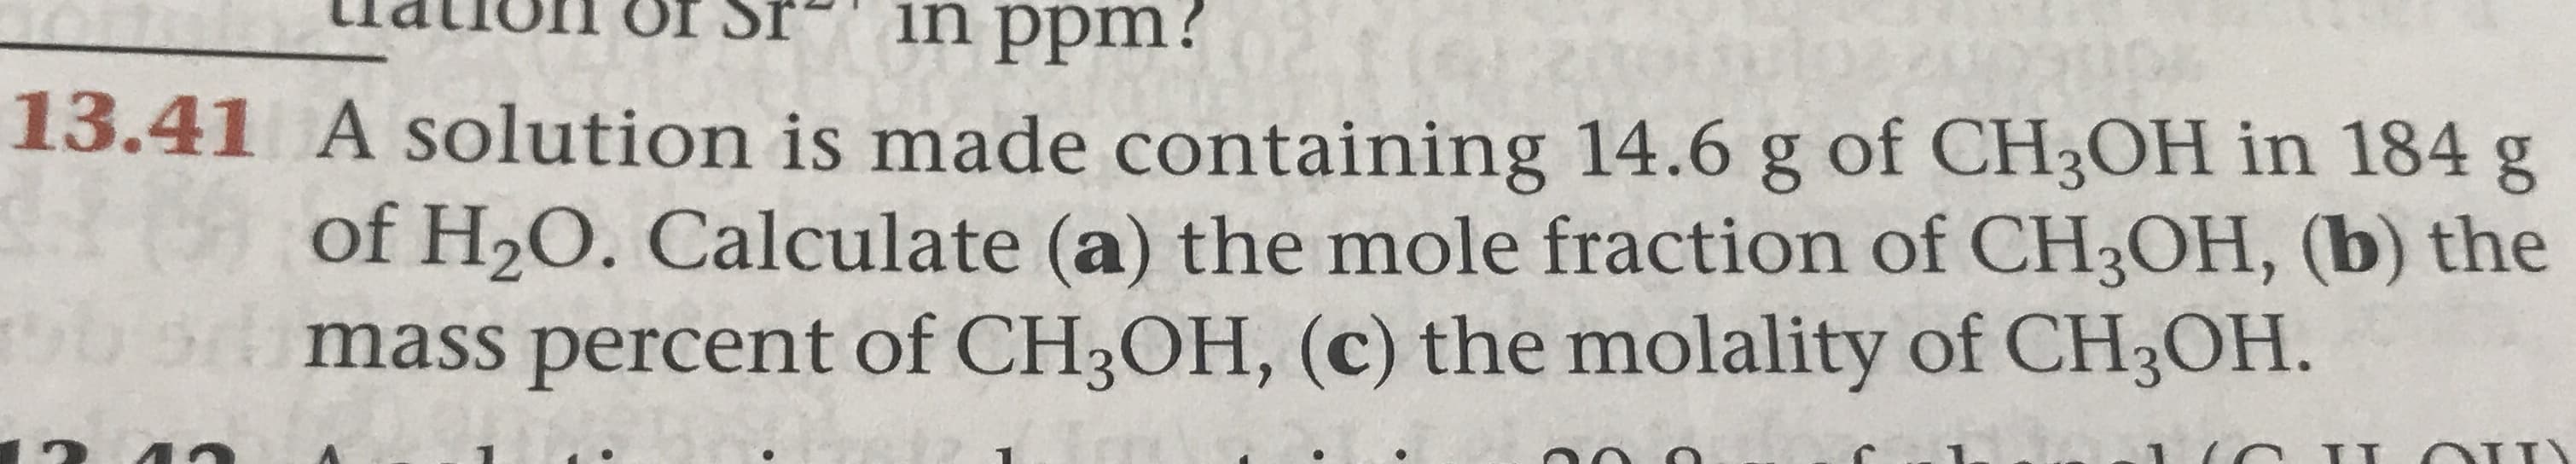 in ppm?
13.41 A solution is made containing 14.6 g of CH3OH in 184 g
(0) of H20. Calculate (a) the mole fraction of CH3OH, (b) the
mass percent of CH3OH, (c) the molality of CH3OH.
II
